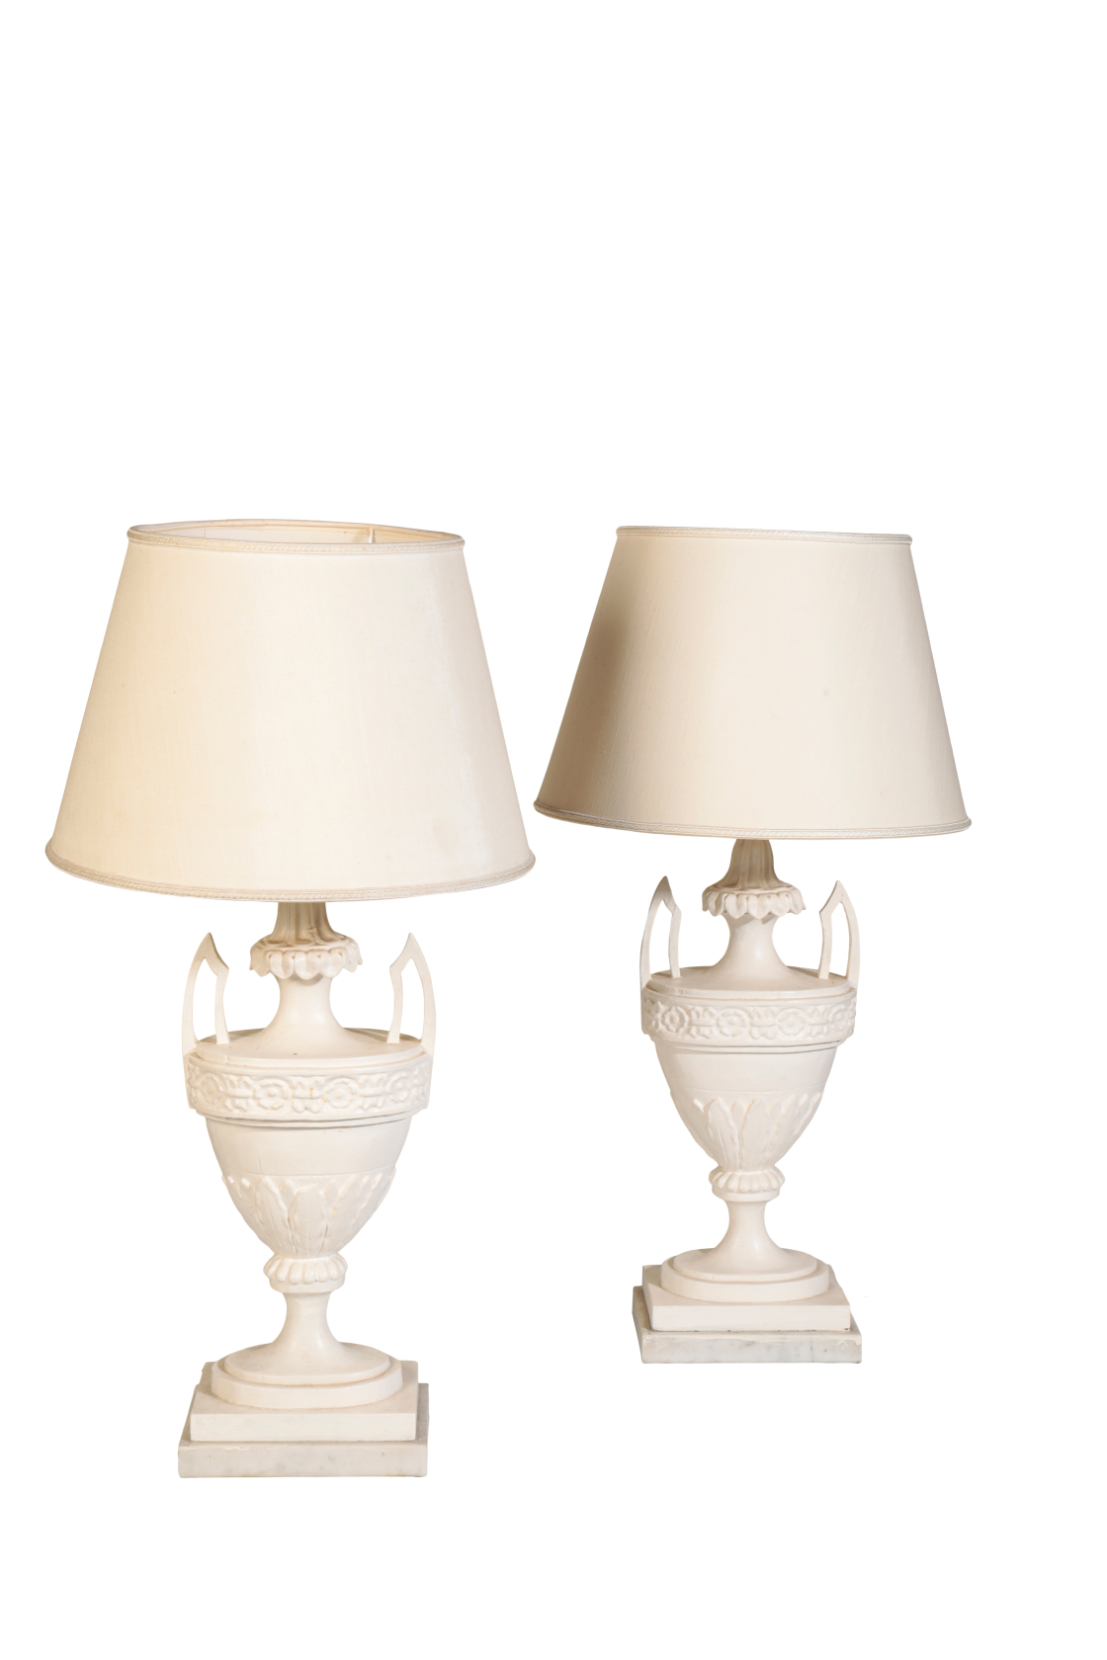 A PAIR OF PAINTED WOOD AND COMPOSITION TABLE LAMPS MODELLED AS TWIN HANDLED URNS,